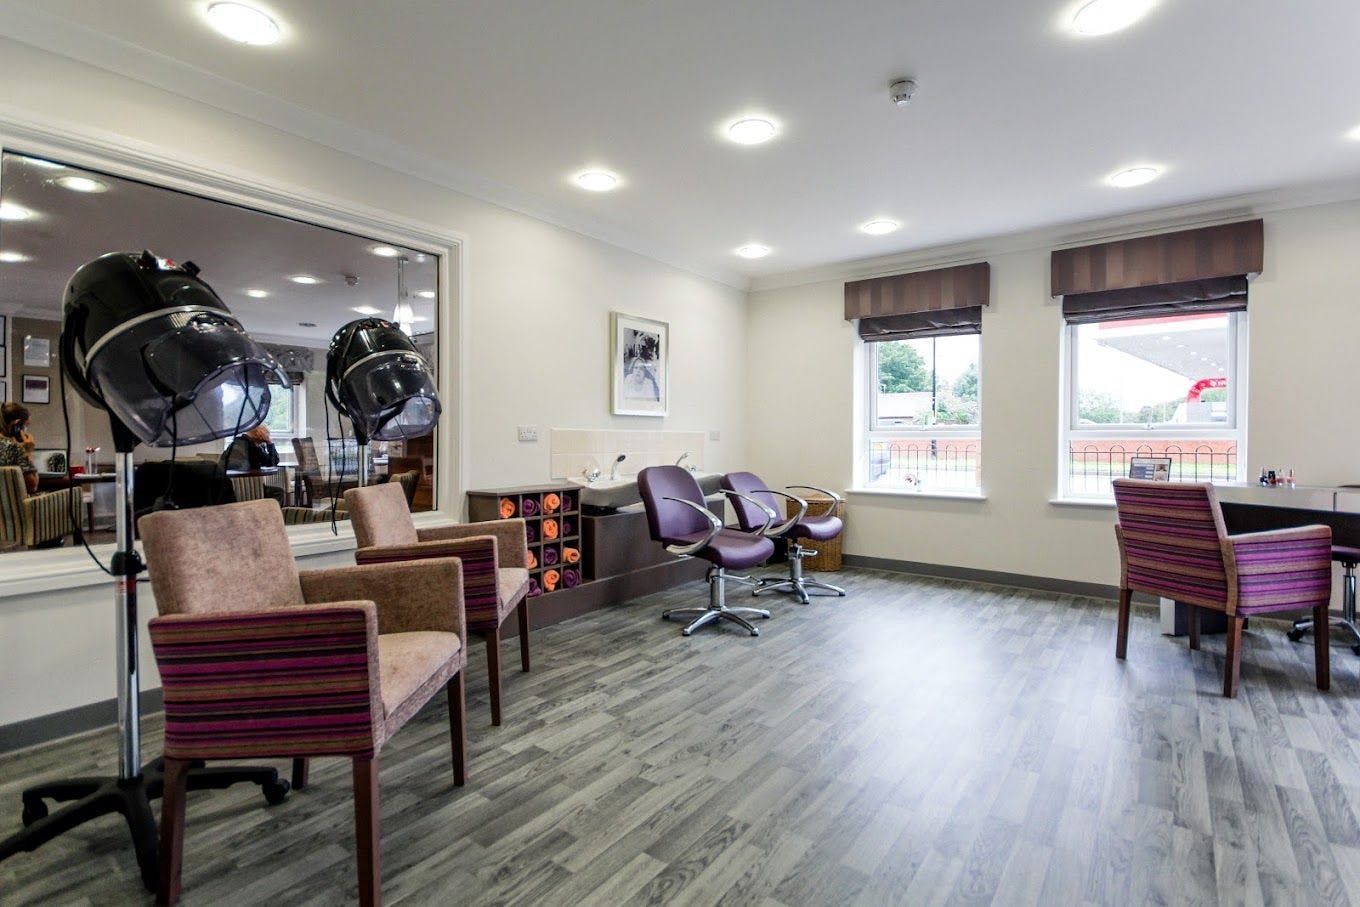 Salon of The Moors care home in Ripon, Yorkshire